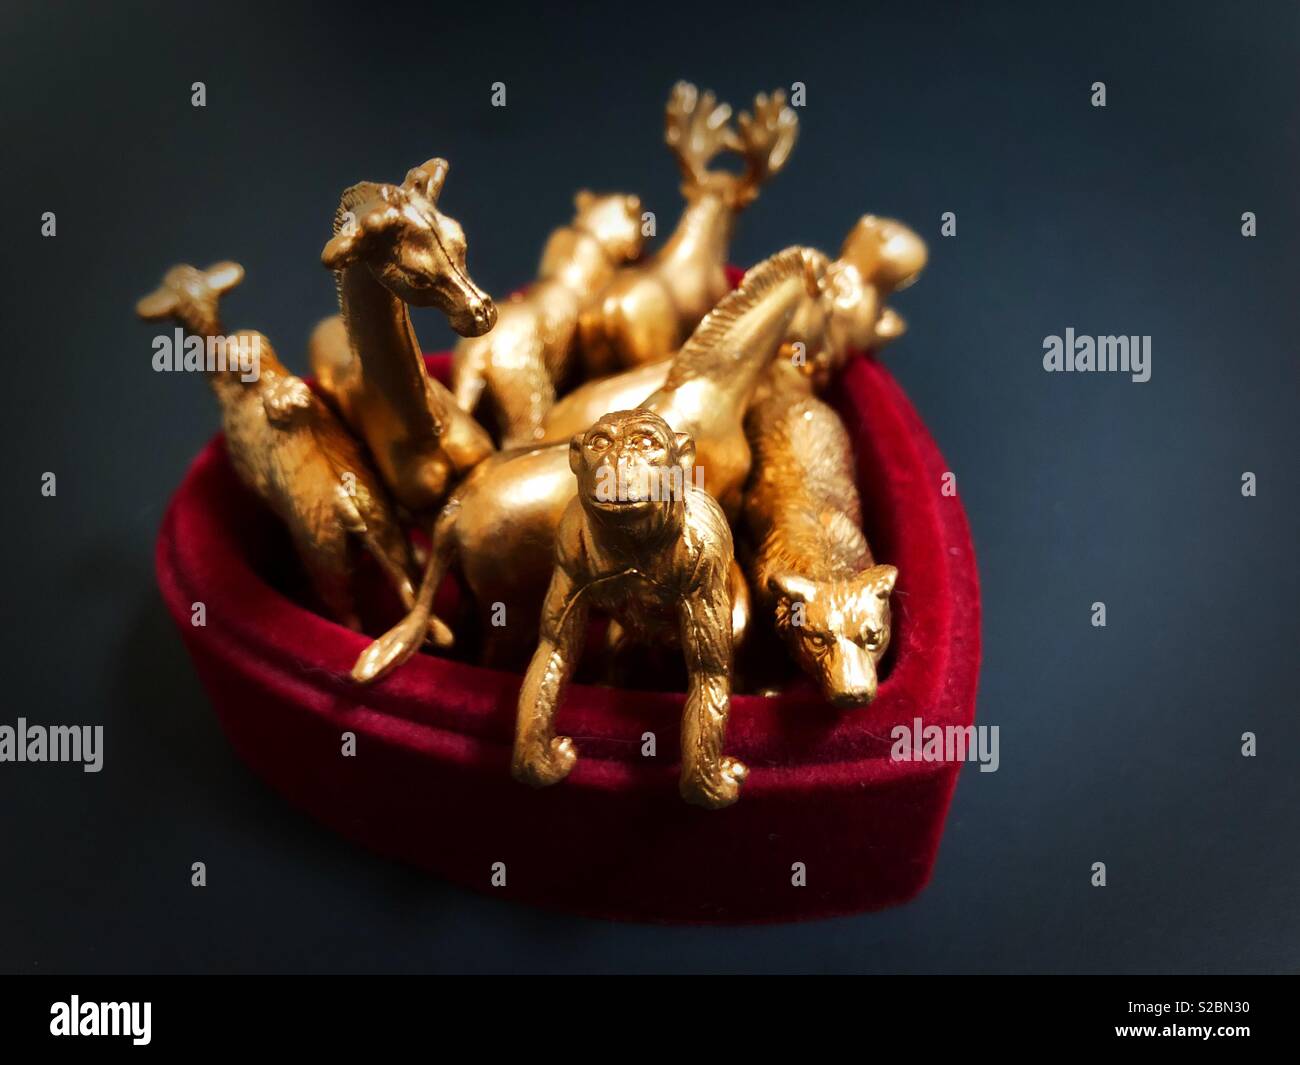 Animal figurines in a box. Stock Photo